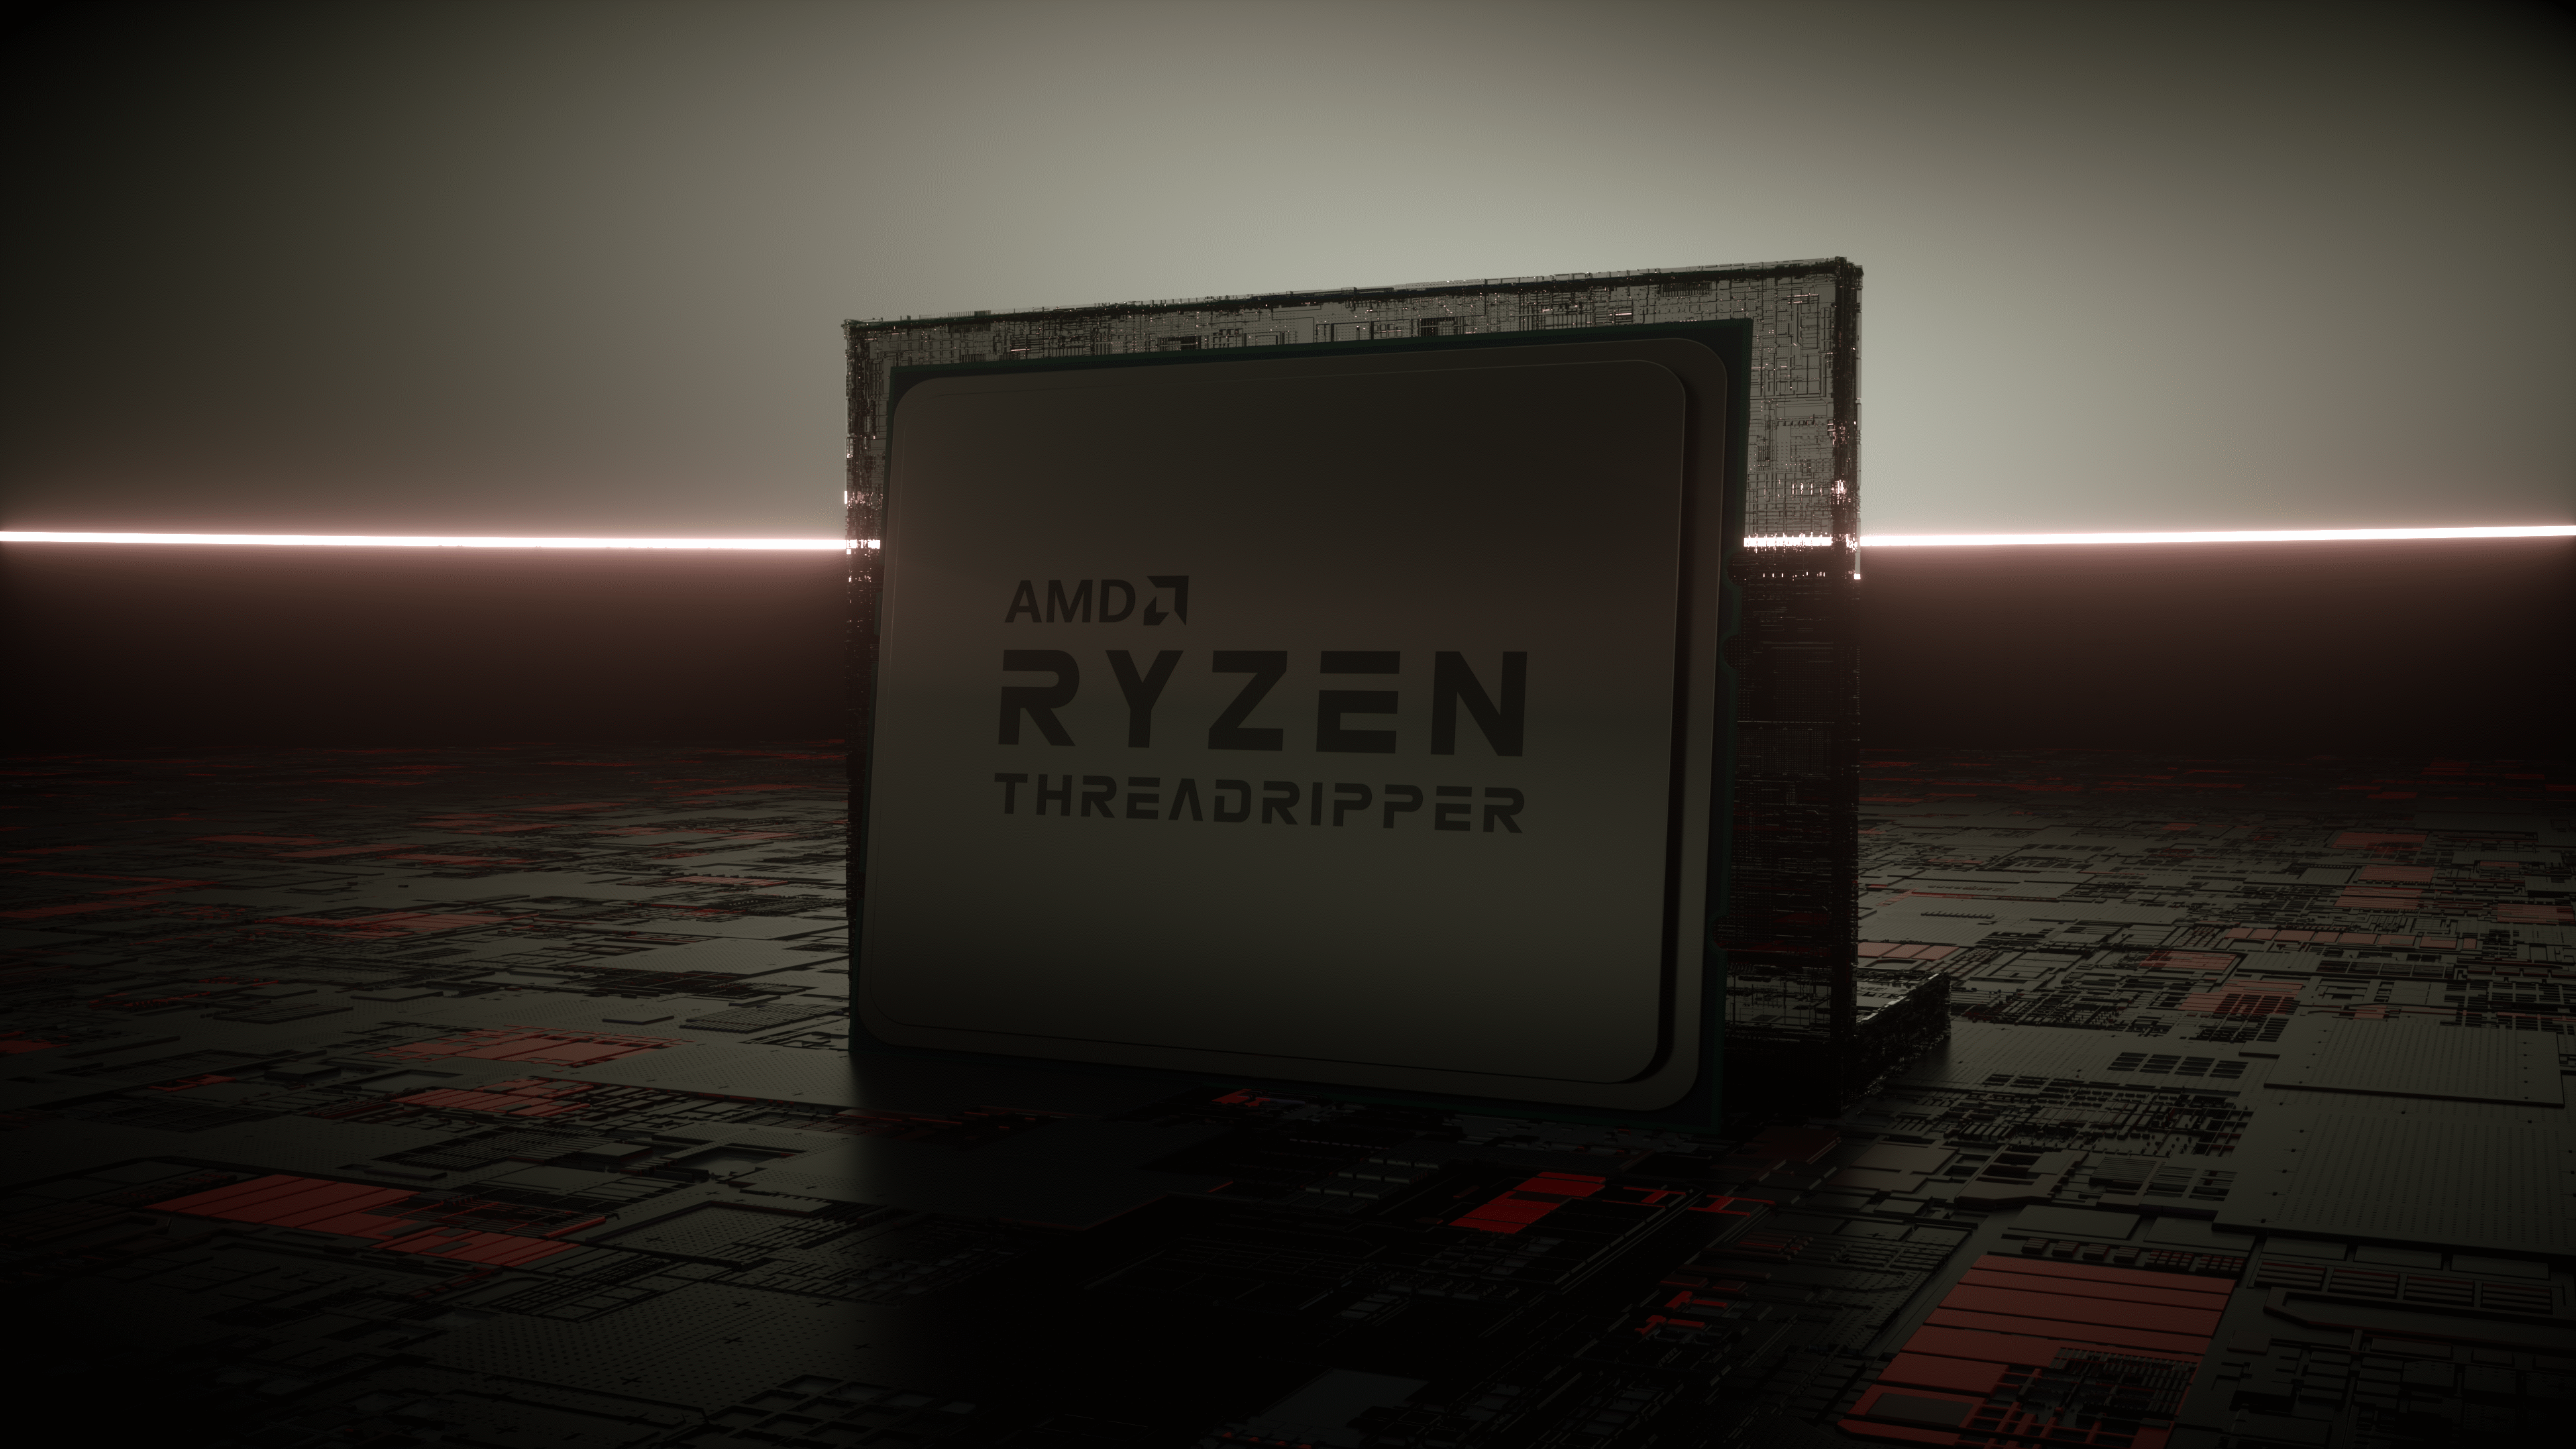 Threadripper 4K wallpaper for your desktop or mobile screen free and easy to download